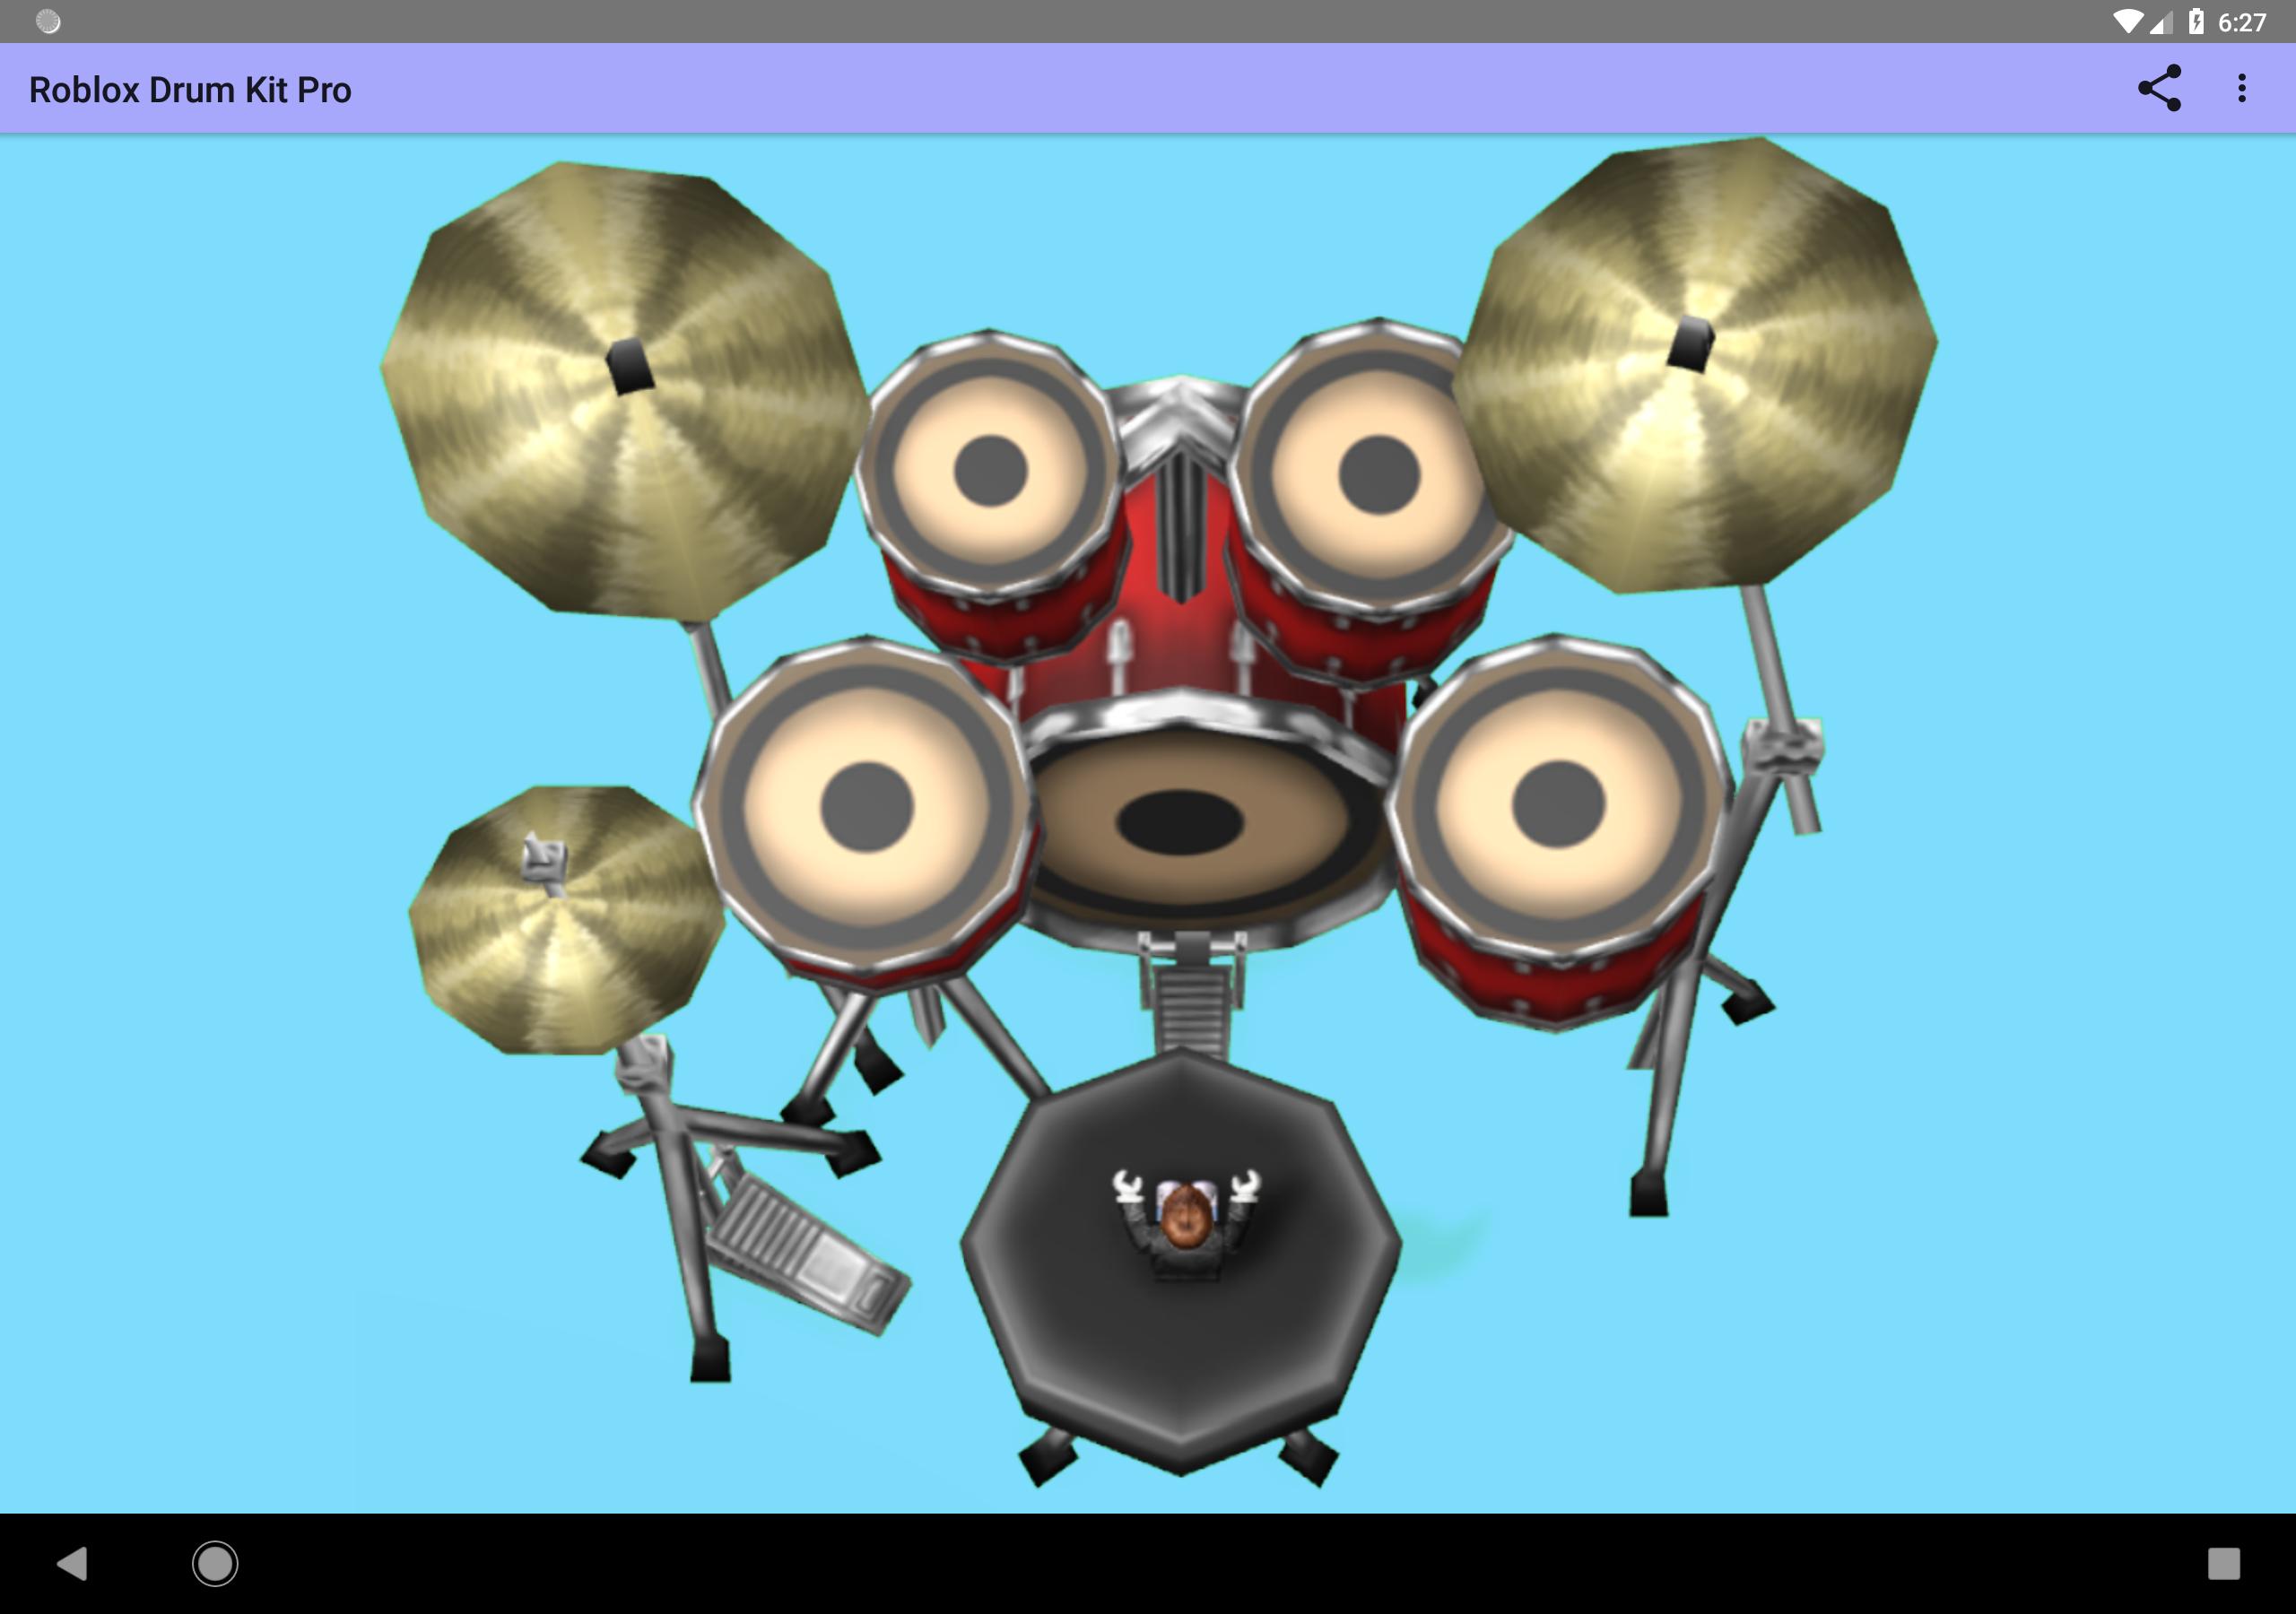 Pro Roblox Oof Drum Kit Death Sound Meme Drums For Android Apk Download - new roblox death sound memes oof oof memes png memes